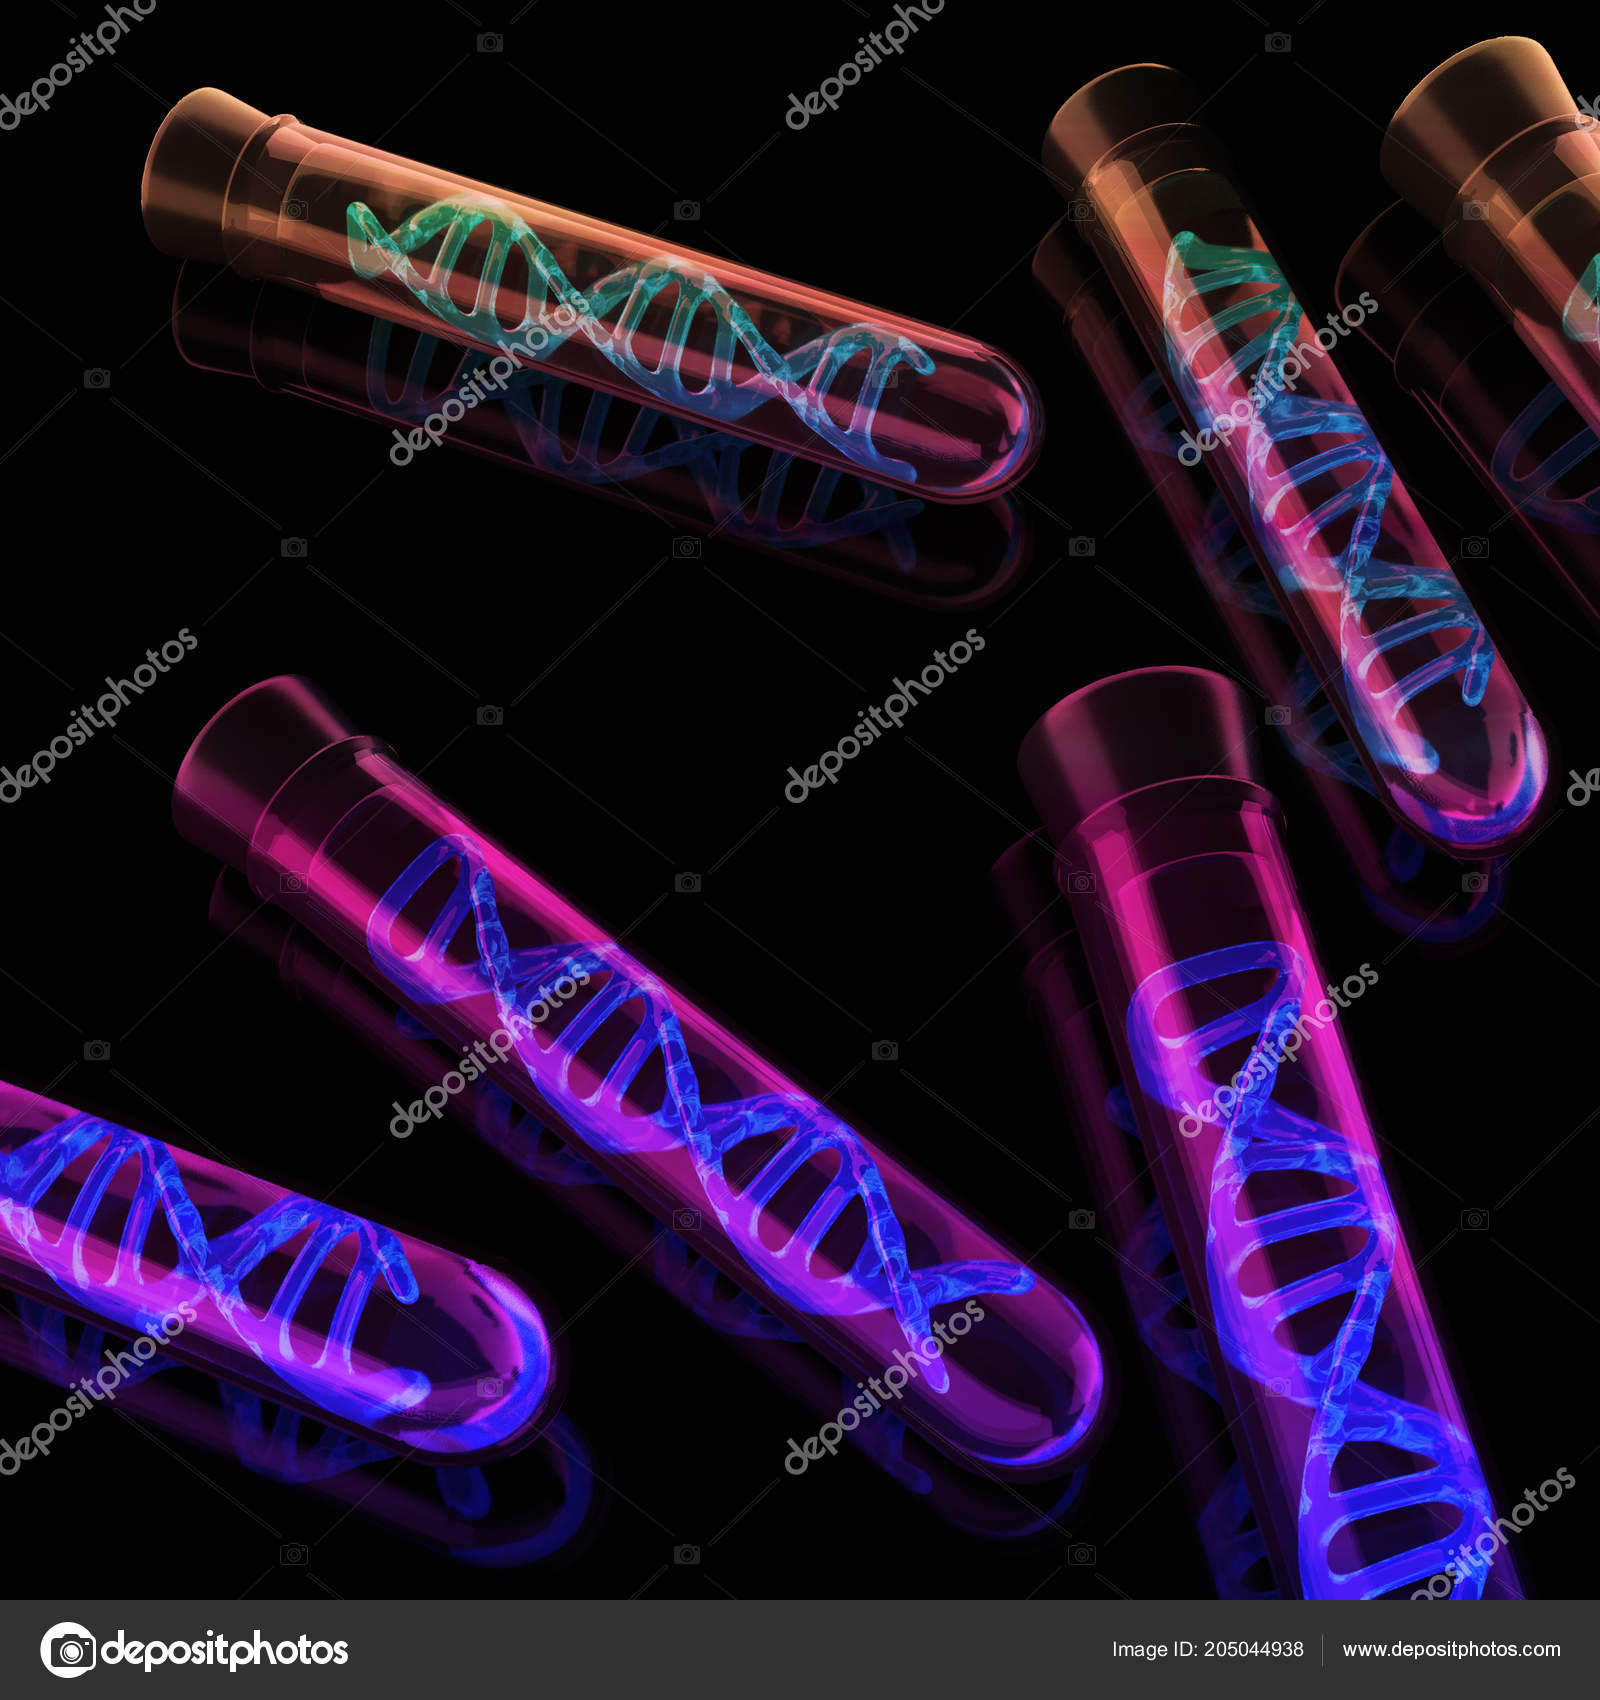 Abstract Lab Equipment Helix Dna Wallpaper Science Medicine Concept  Rendering Stock Photo by ©peshkova 205044938